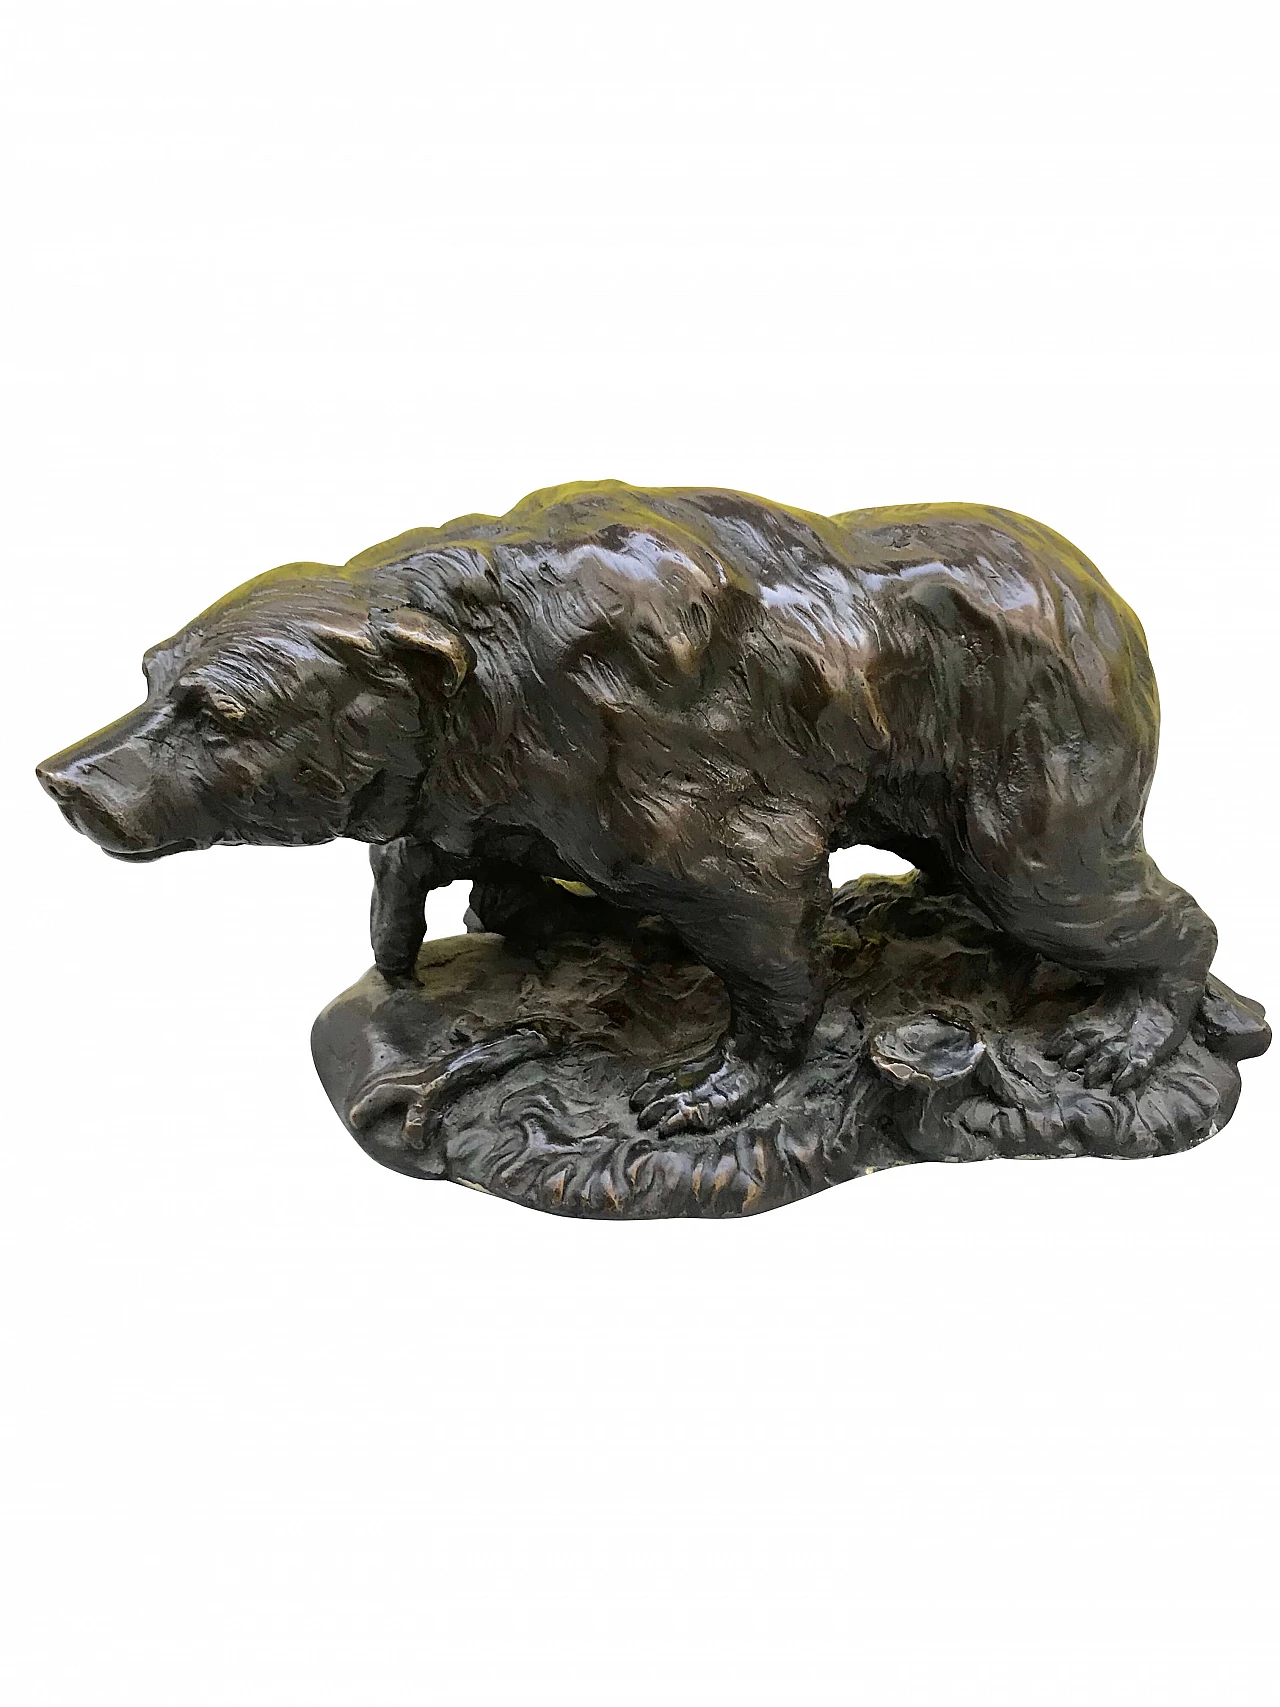 French bronze sculpture of “Bear”, 19th century 1178205